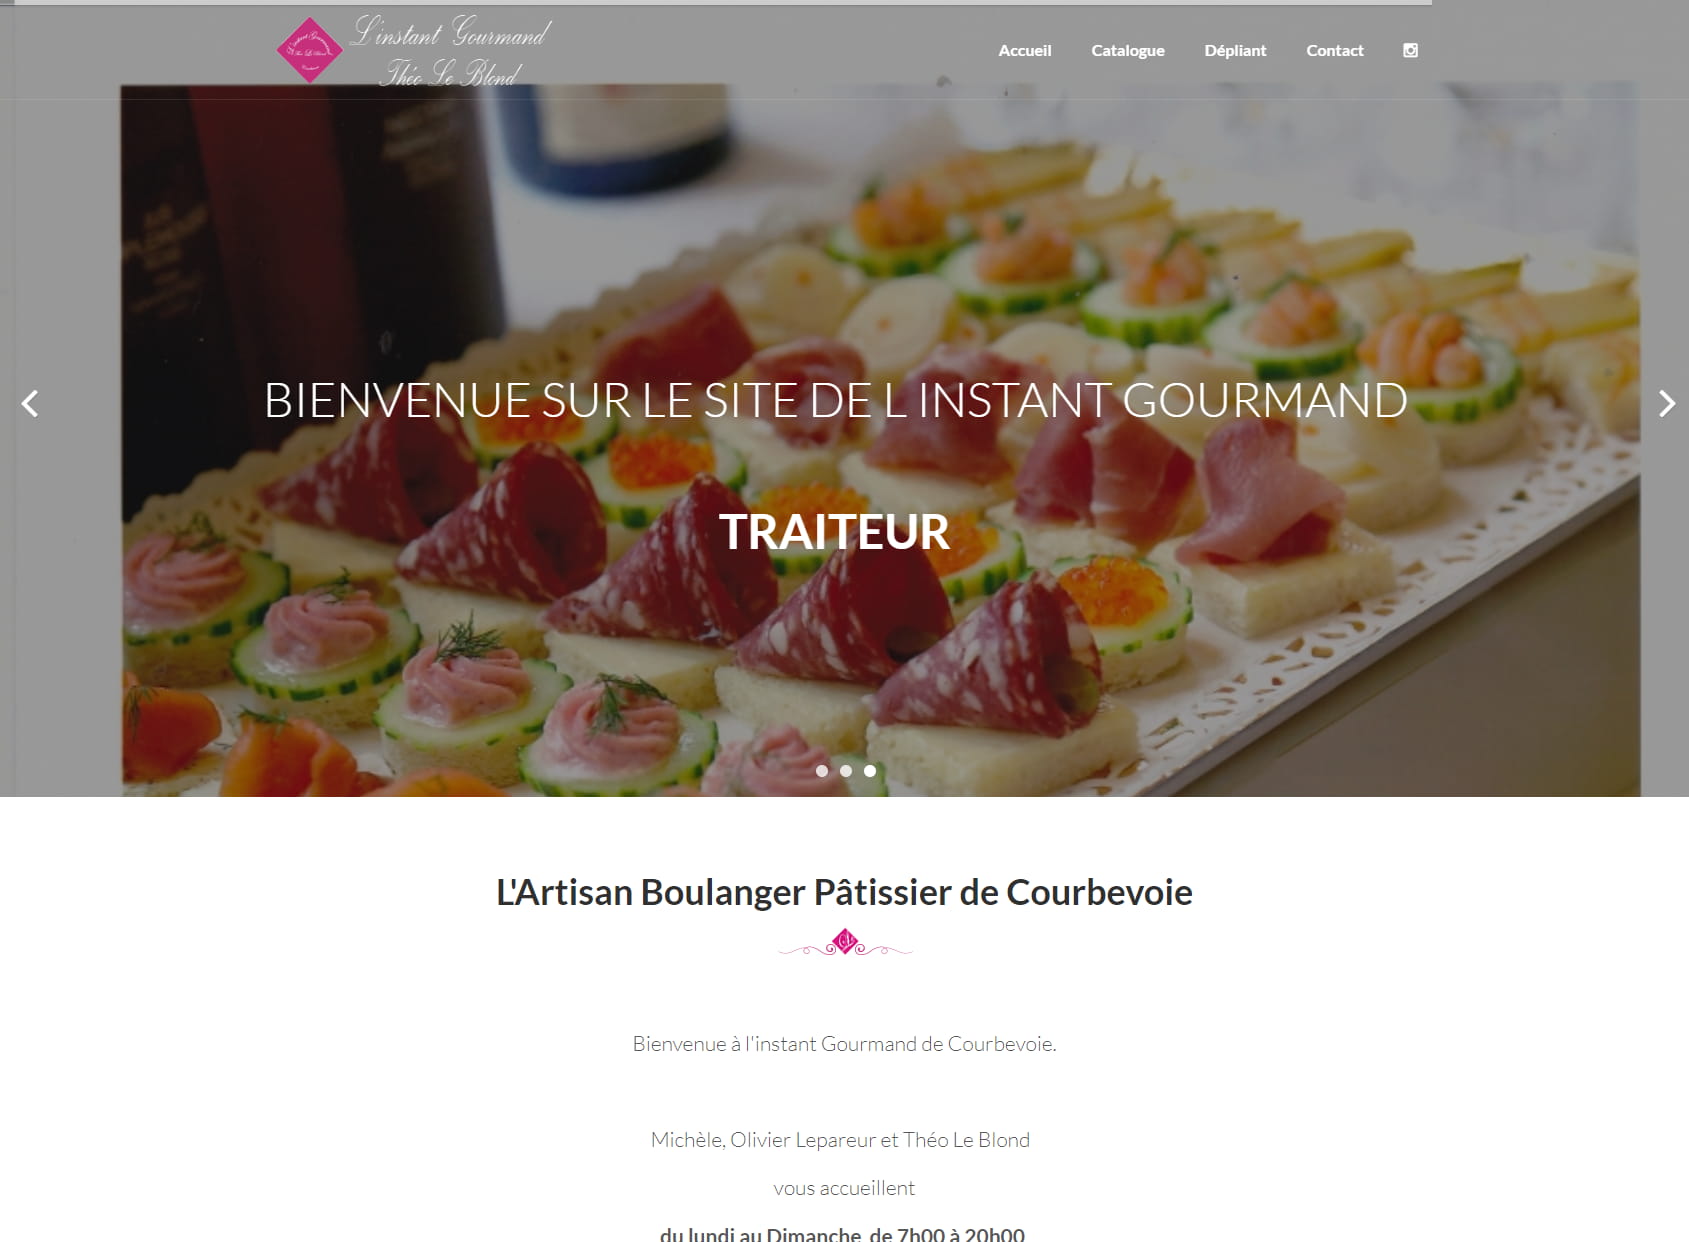 L'Instant Gourmand